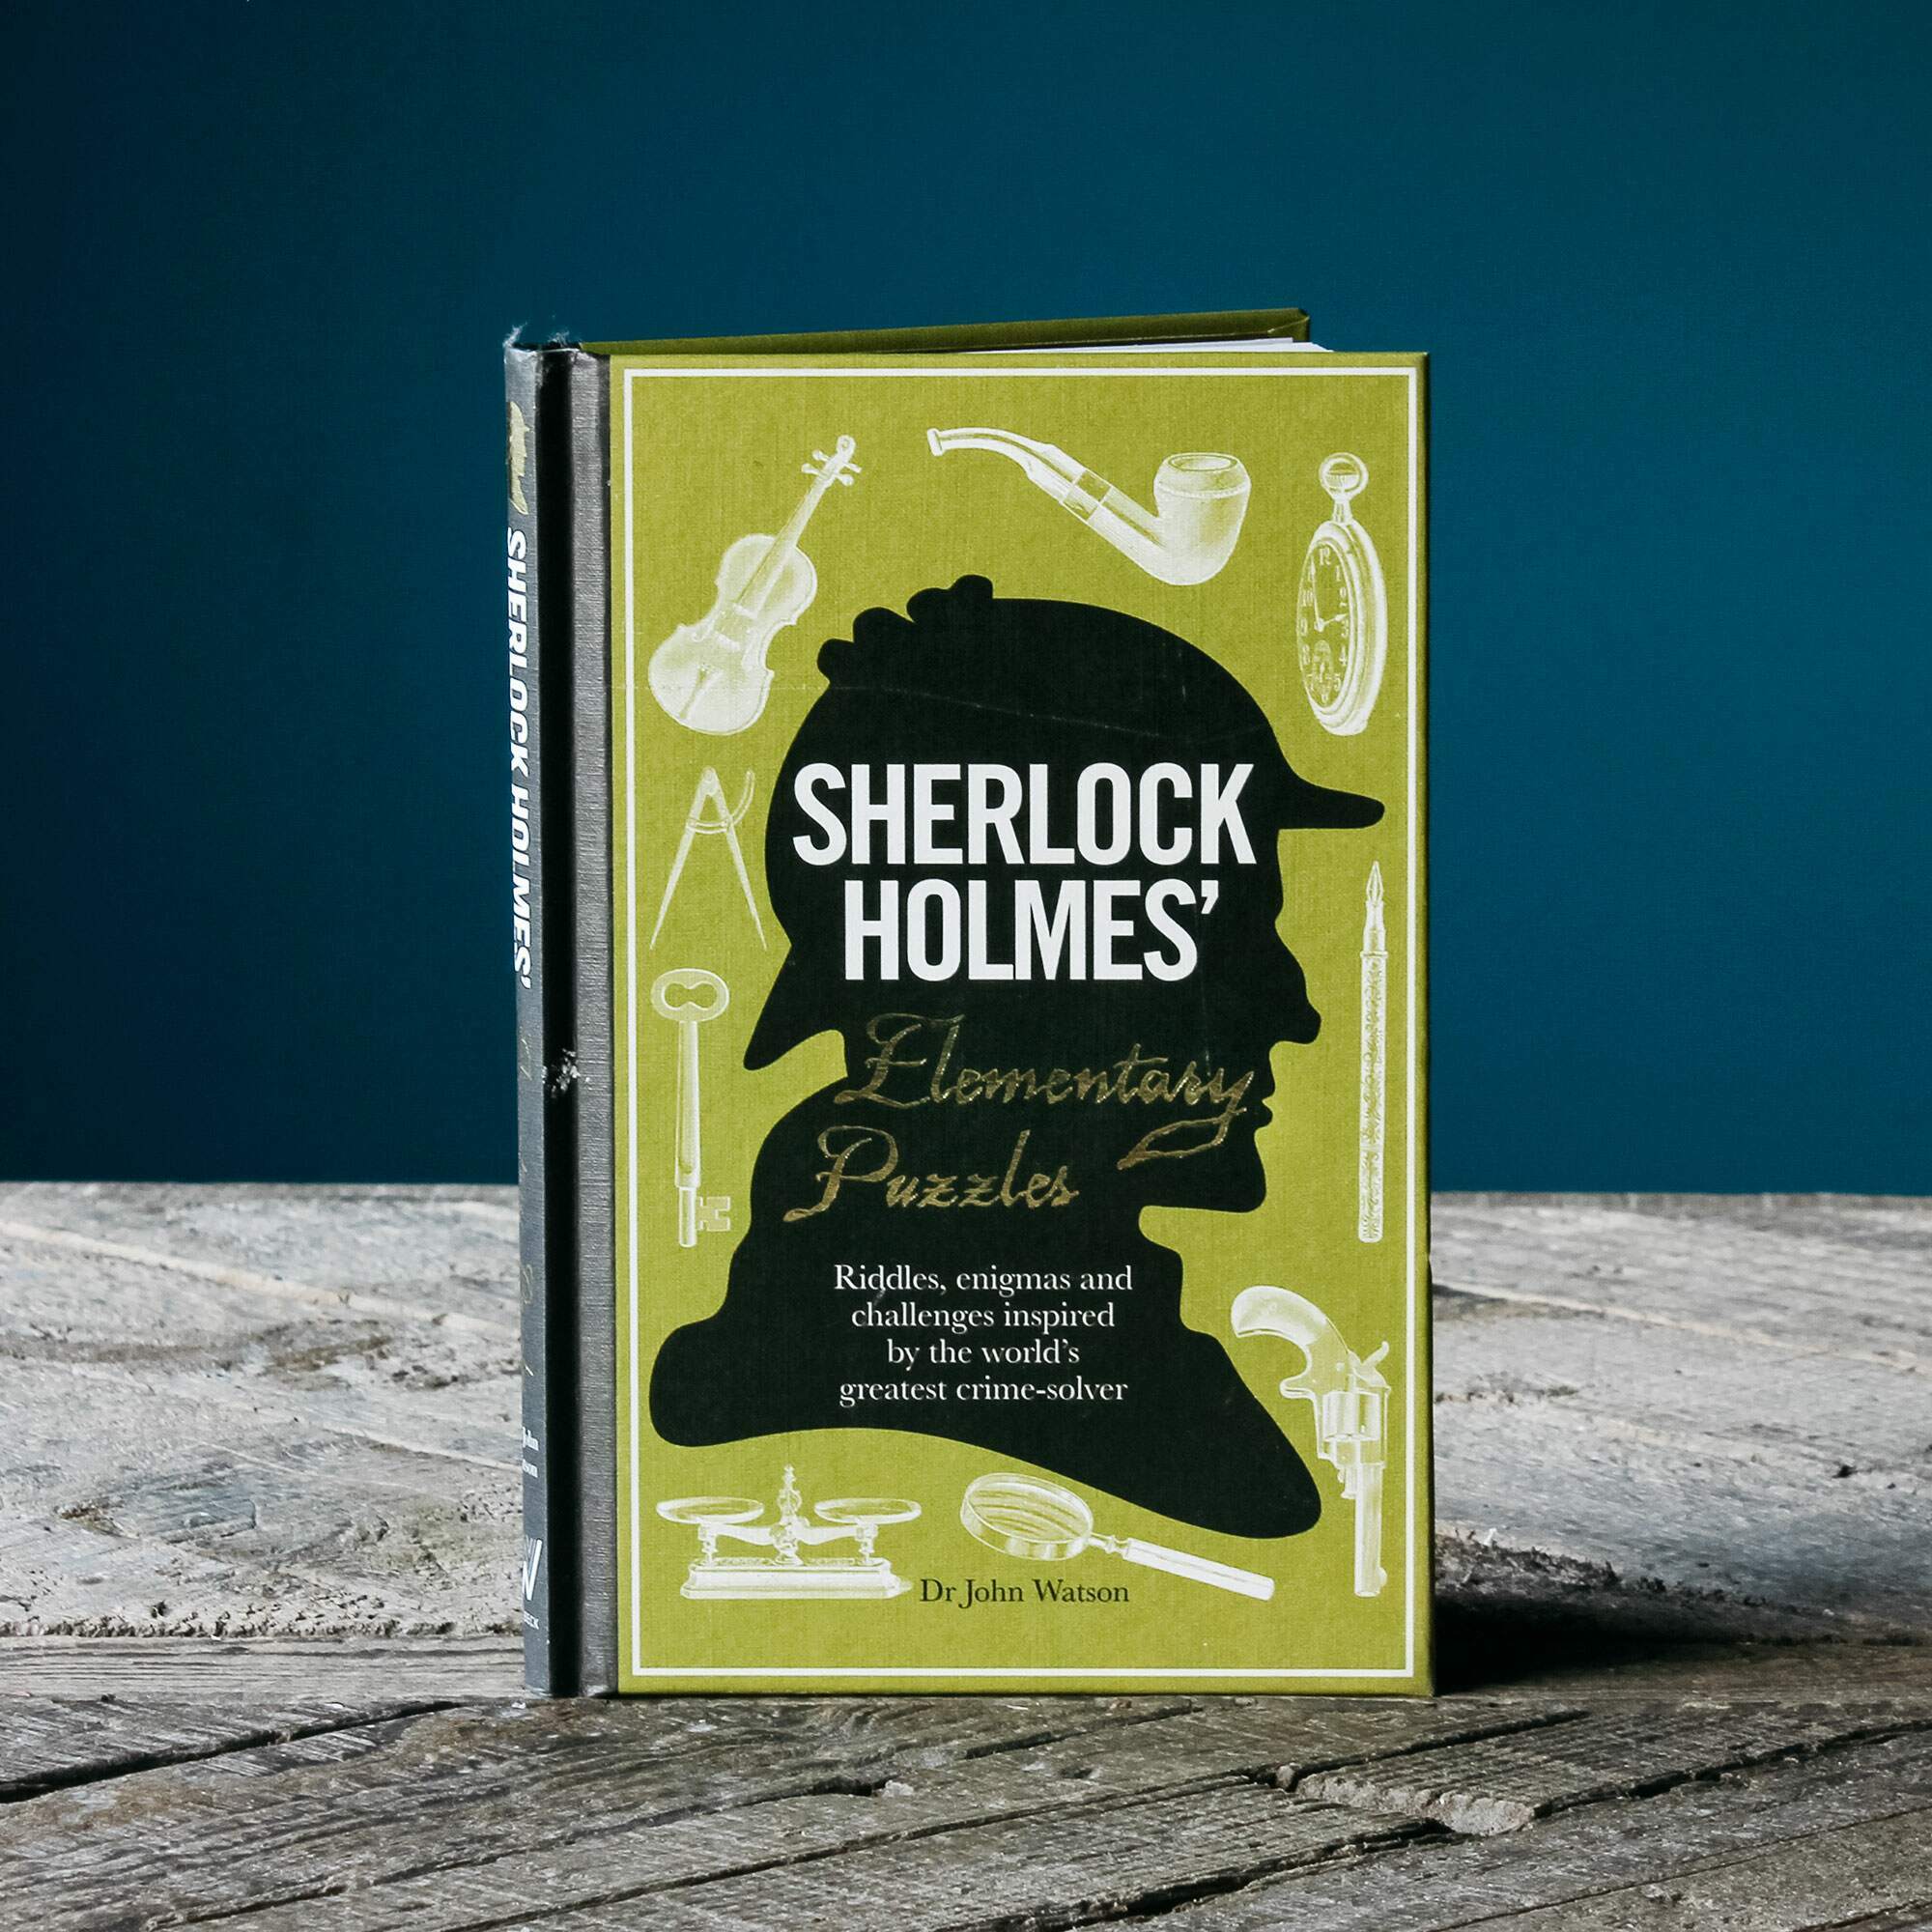 Photo of Graham and green sherlock holmes puzzle book